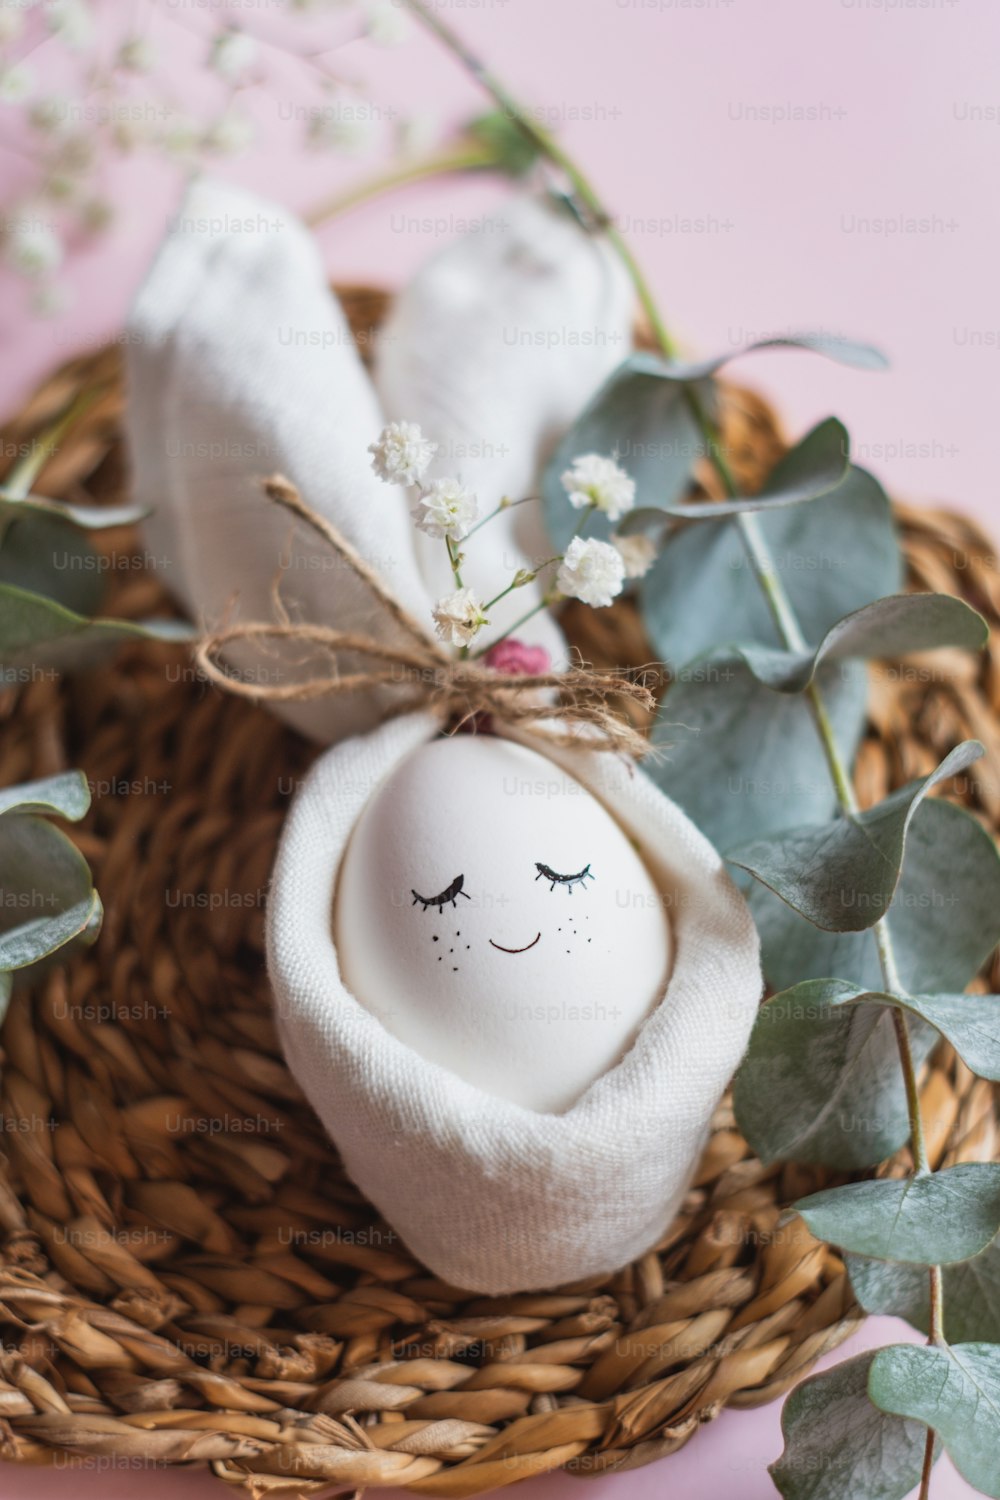 a white egg sitting on top of a basket next to a plant